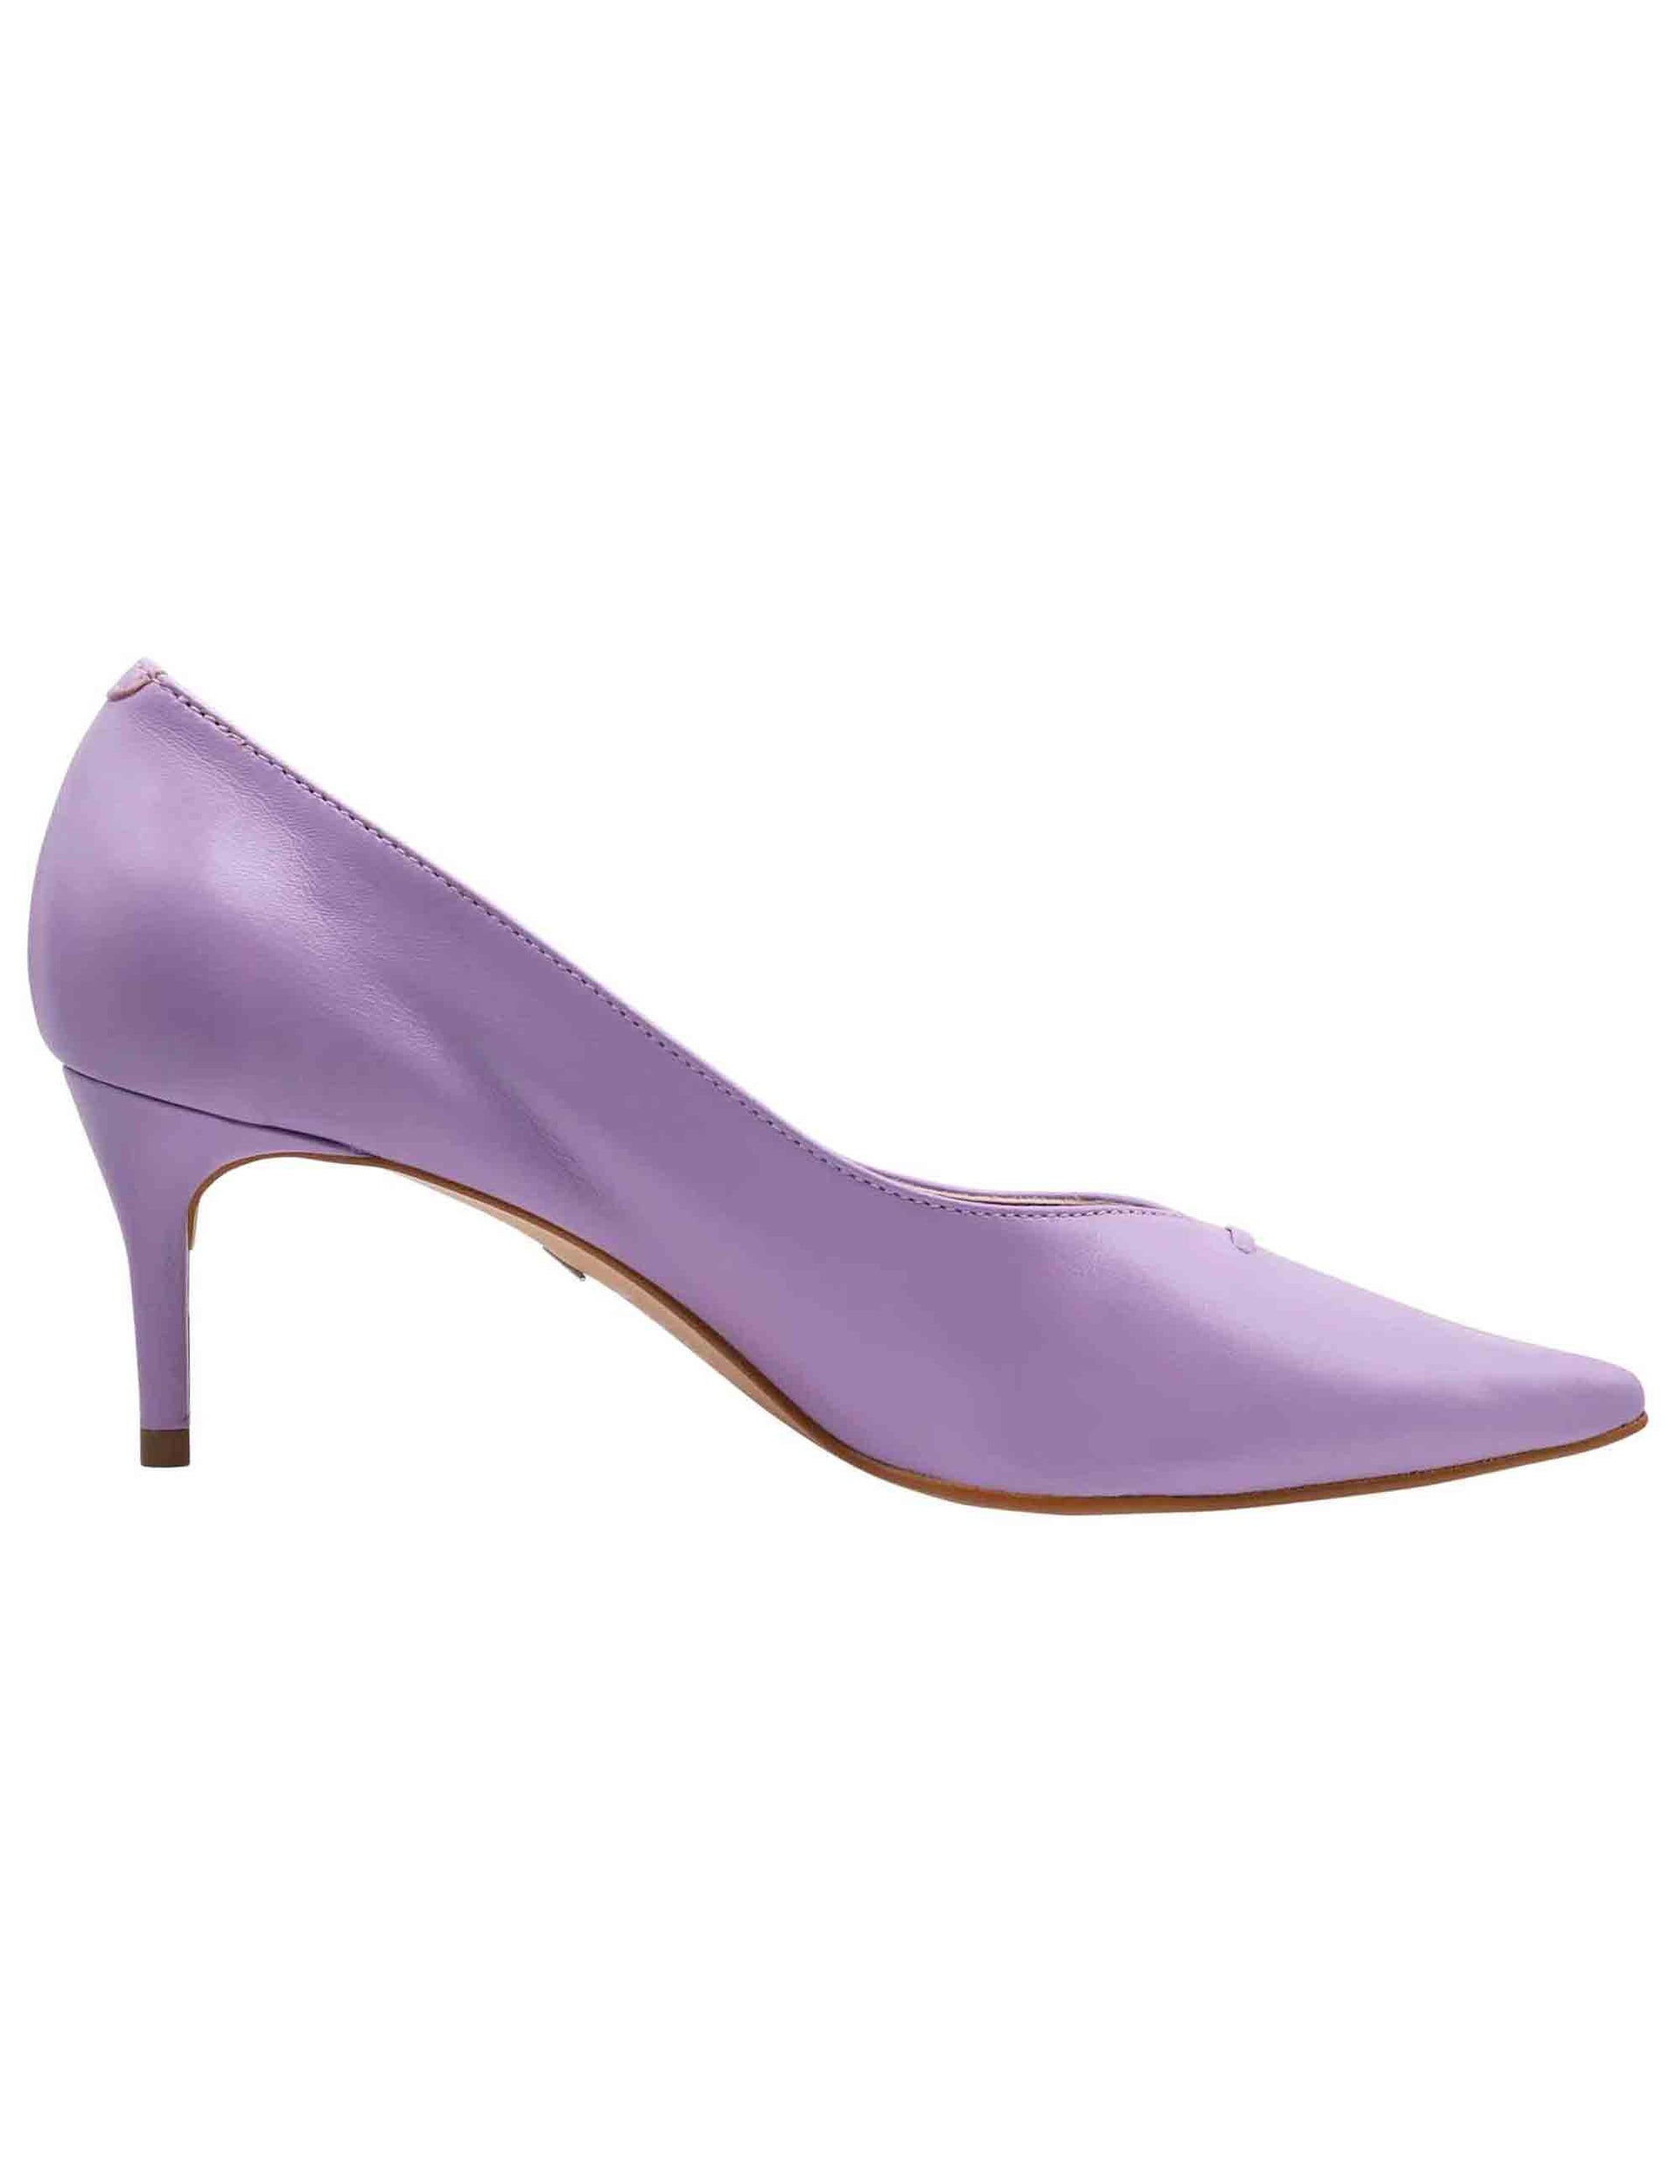 Women's high-necked pumps made of wisteria leather with medium heel and pointed toe